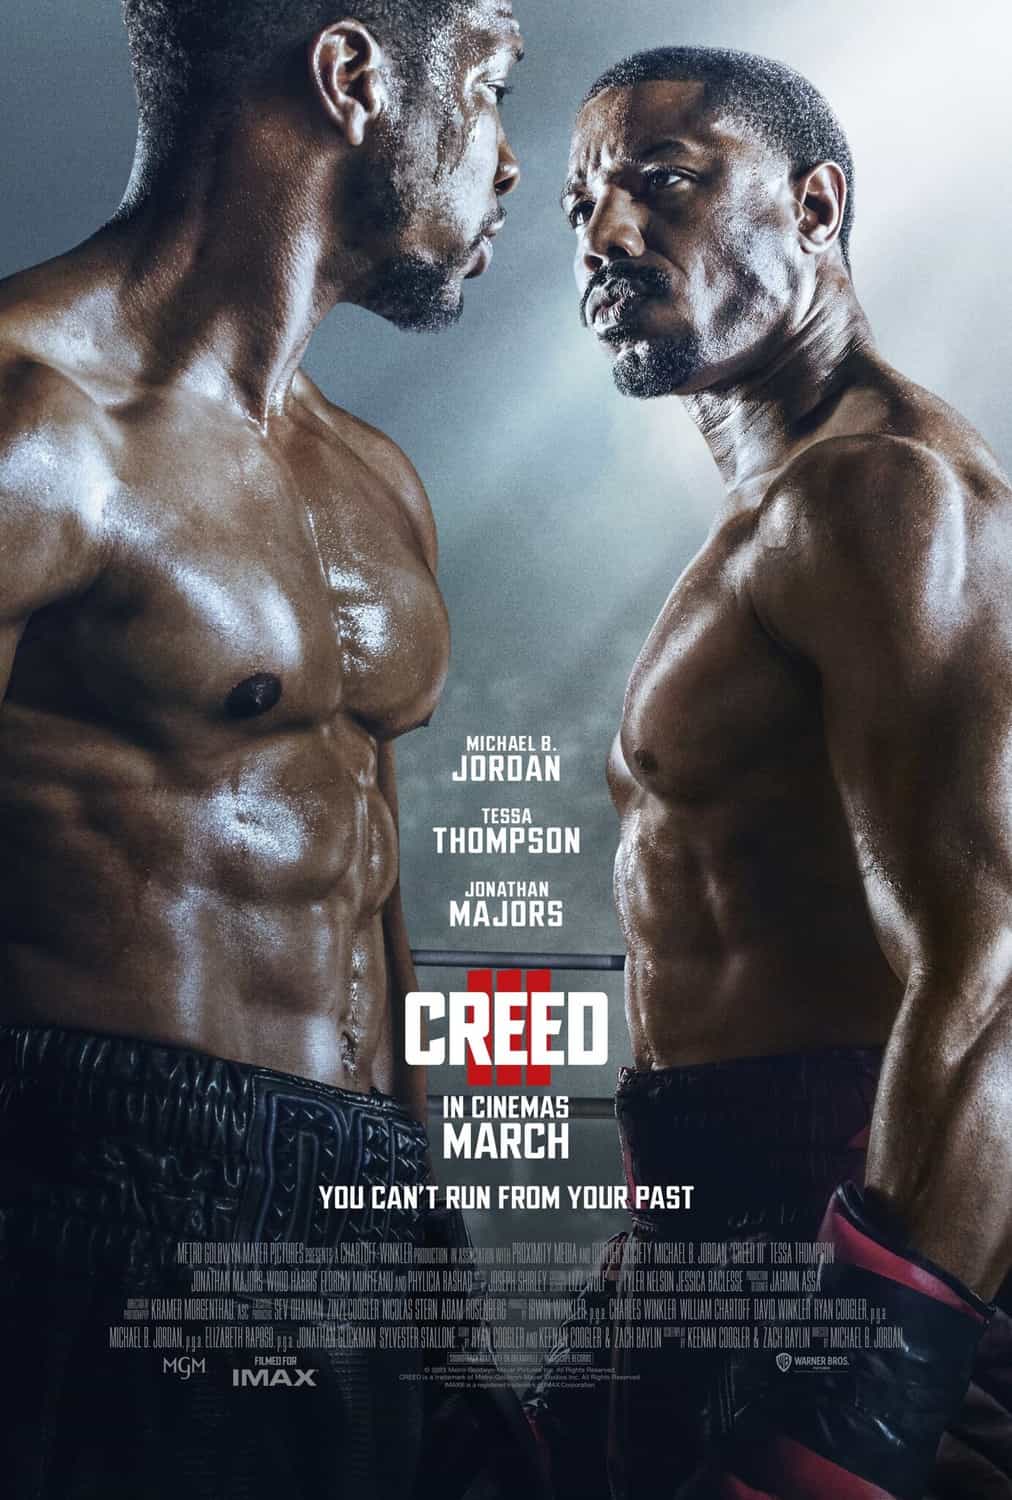 Global Box Office Weekend Report 3rd - 5th March 2023:  Creed III tops the global box office on its debut weekend with over $100 Million